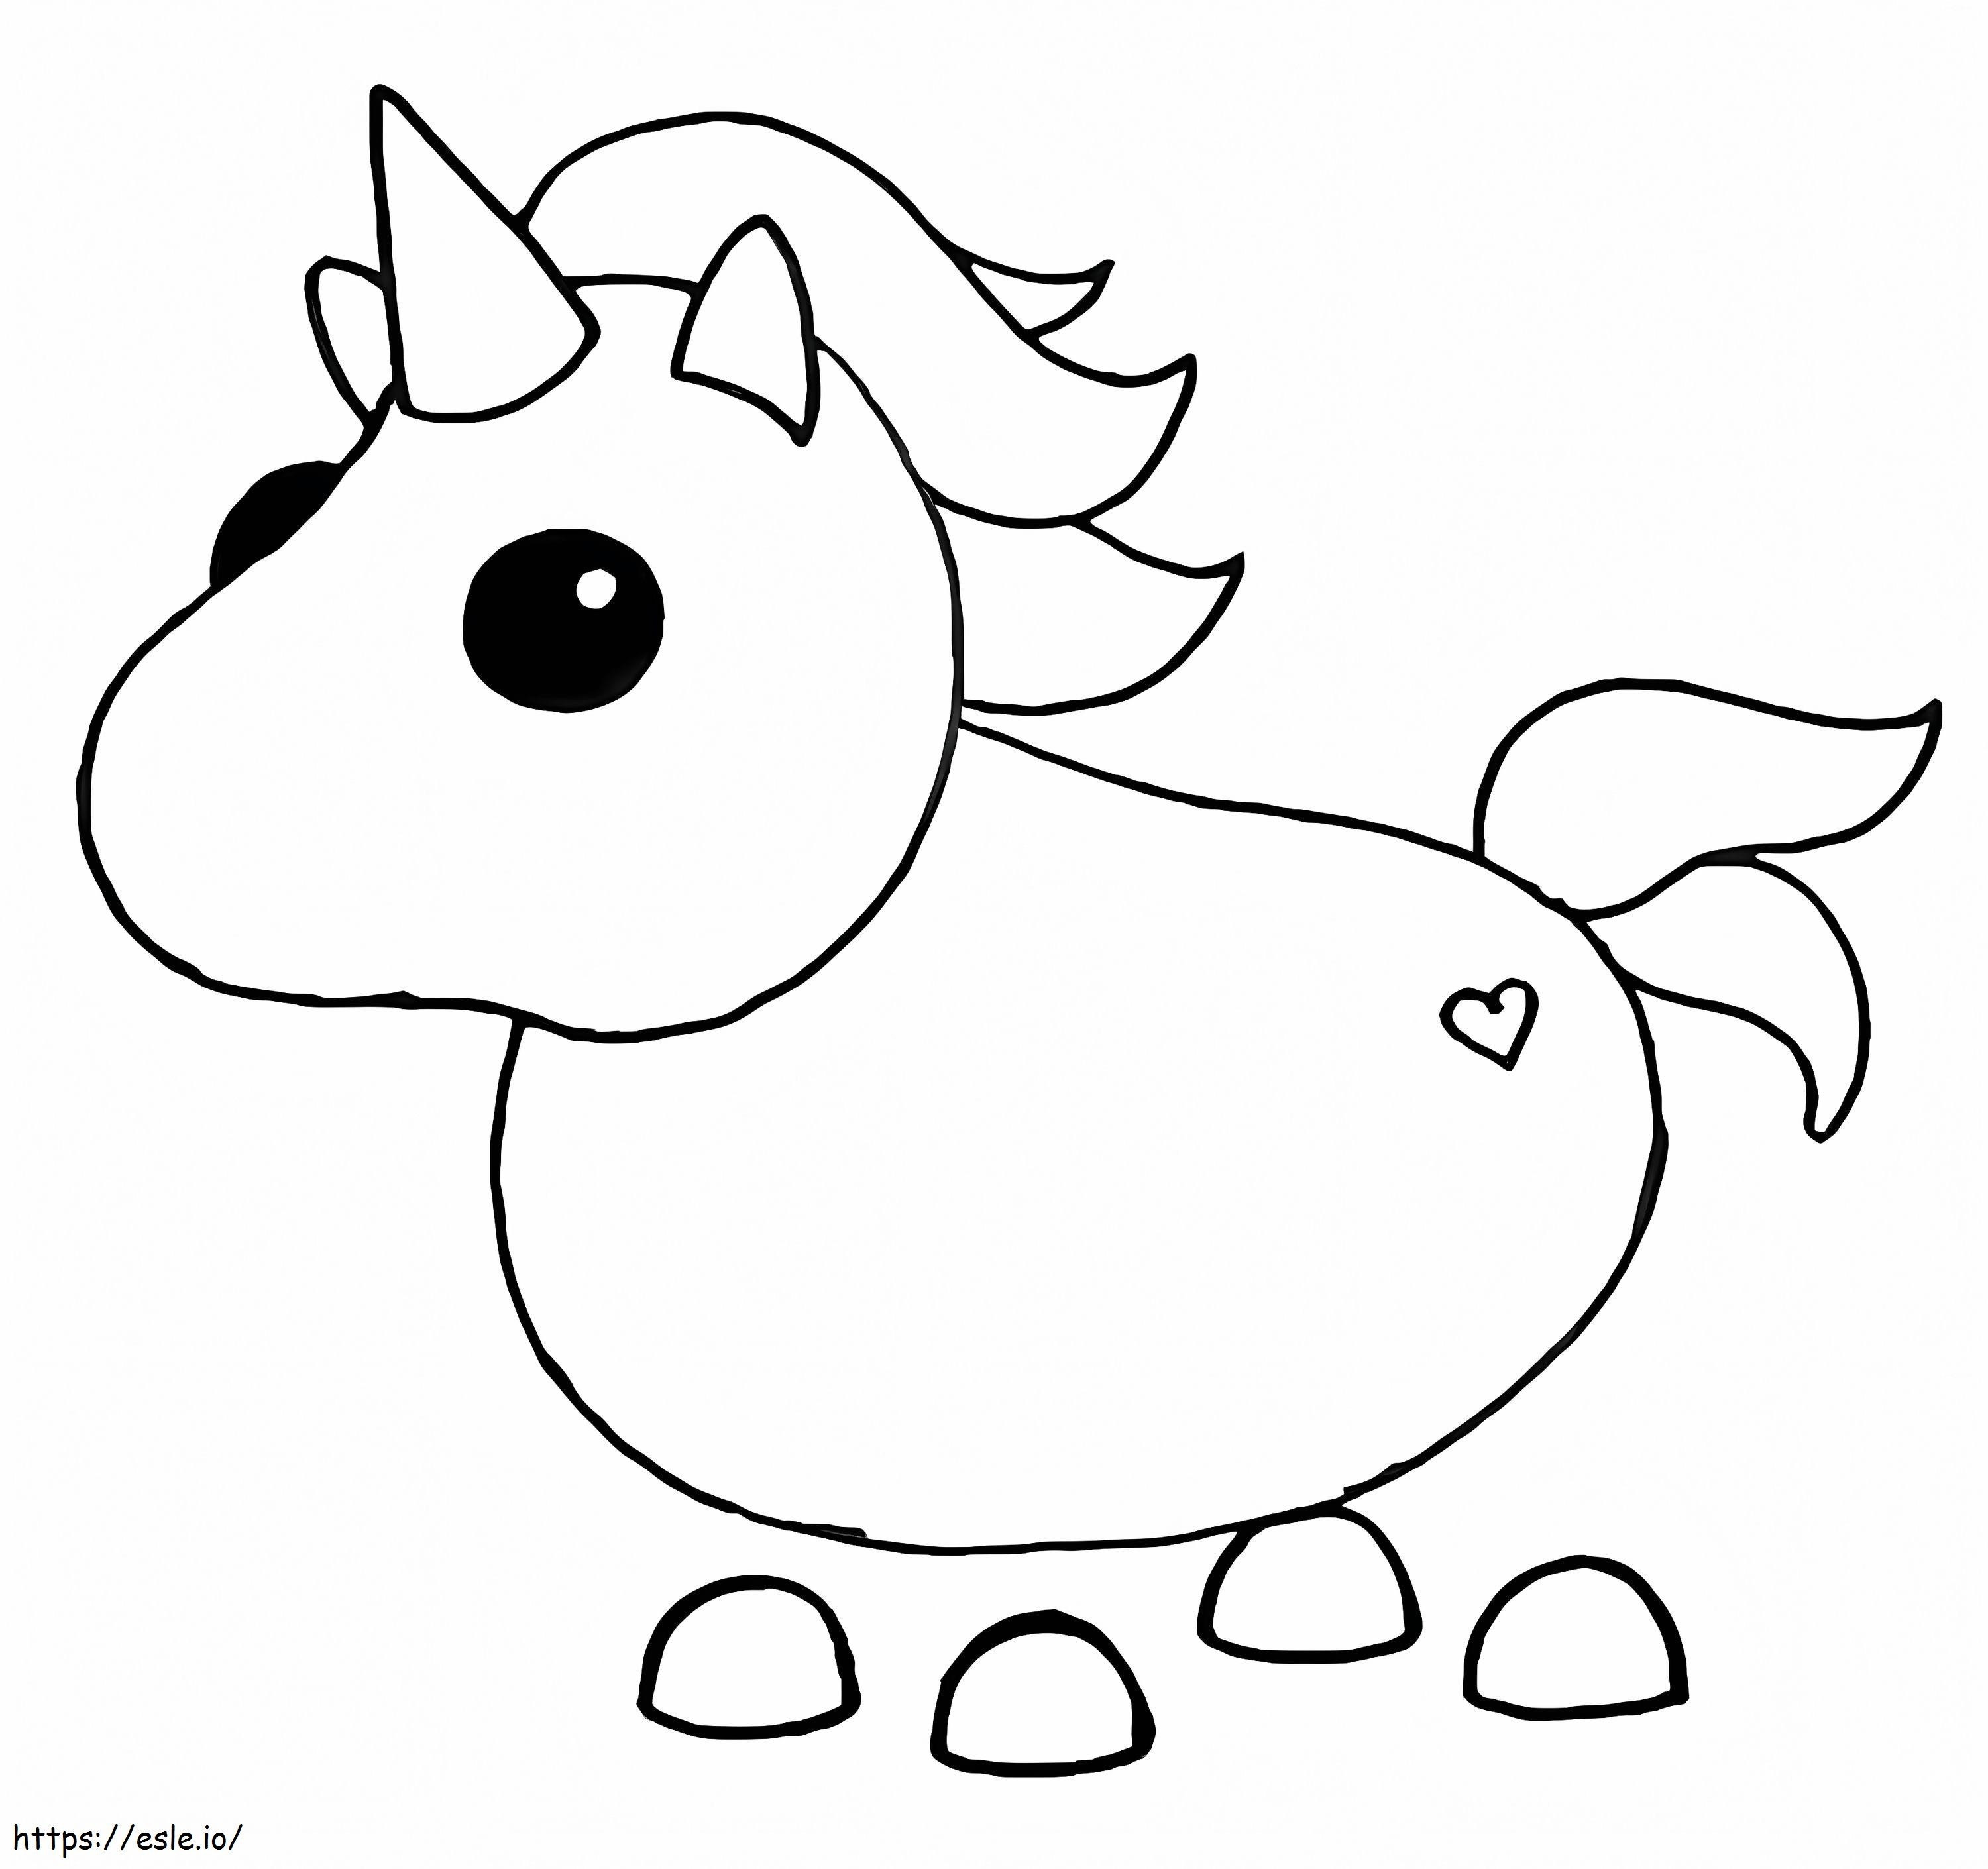 Unicorn Adopt Me coloring page